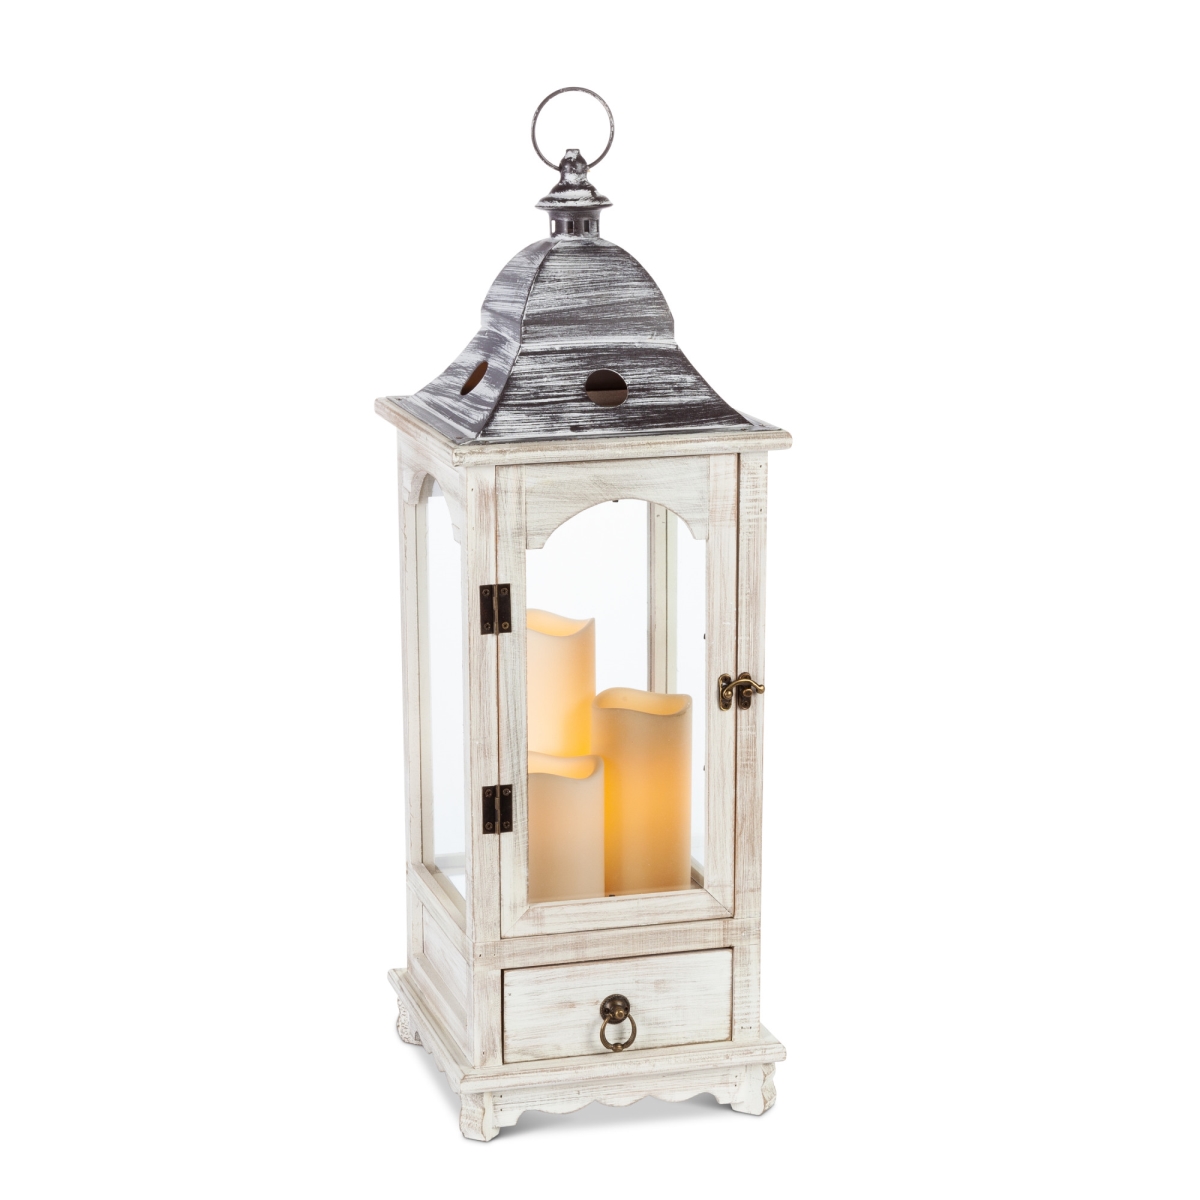 Gerson 44650ec 27 In. Faded White Wood Lantern With Metal Top & Glass Windows